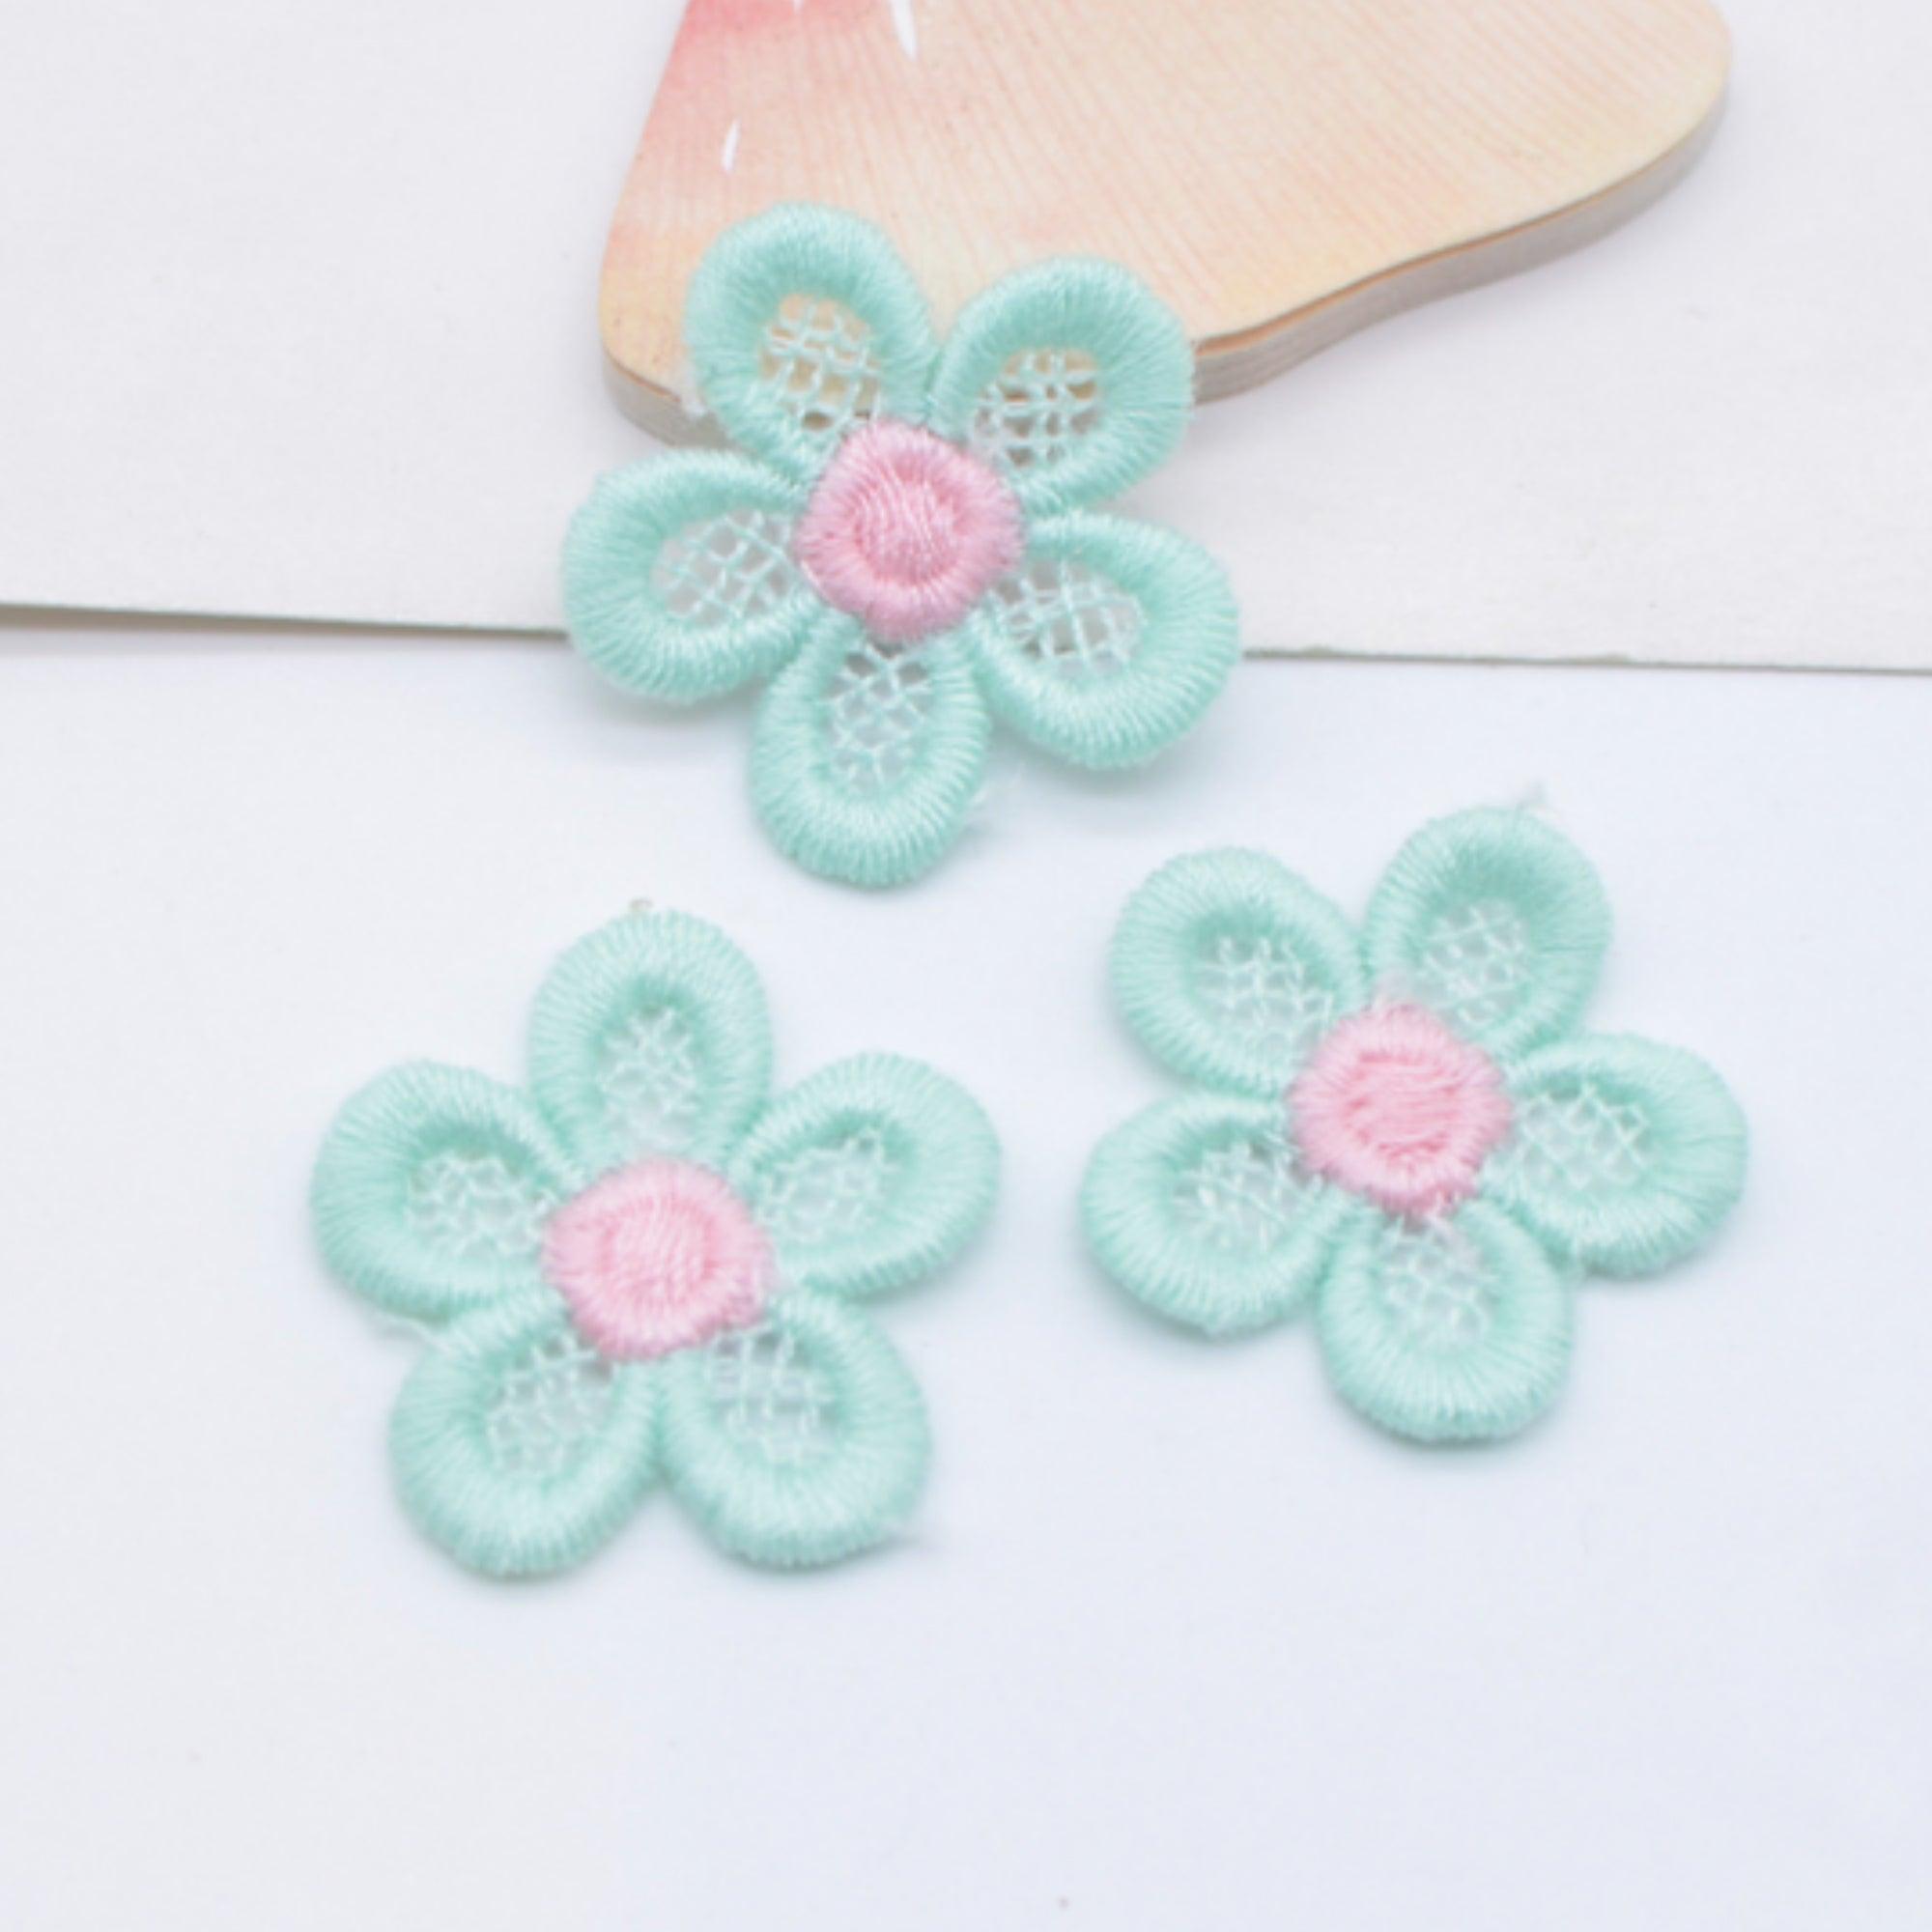 Embroidered Daisies Collection Mint & Pink 1" Scrapbook Flower Embellishments by SSC Designs - 10 Pieces - Scrapbook Supply Companies